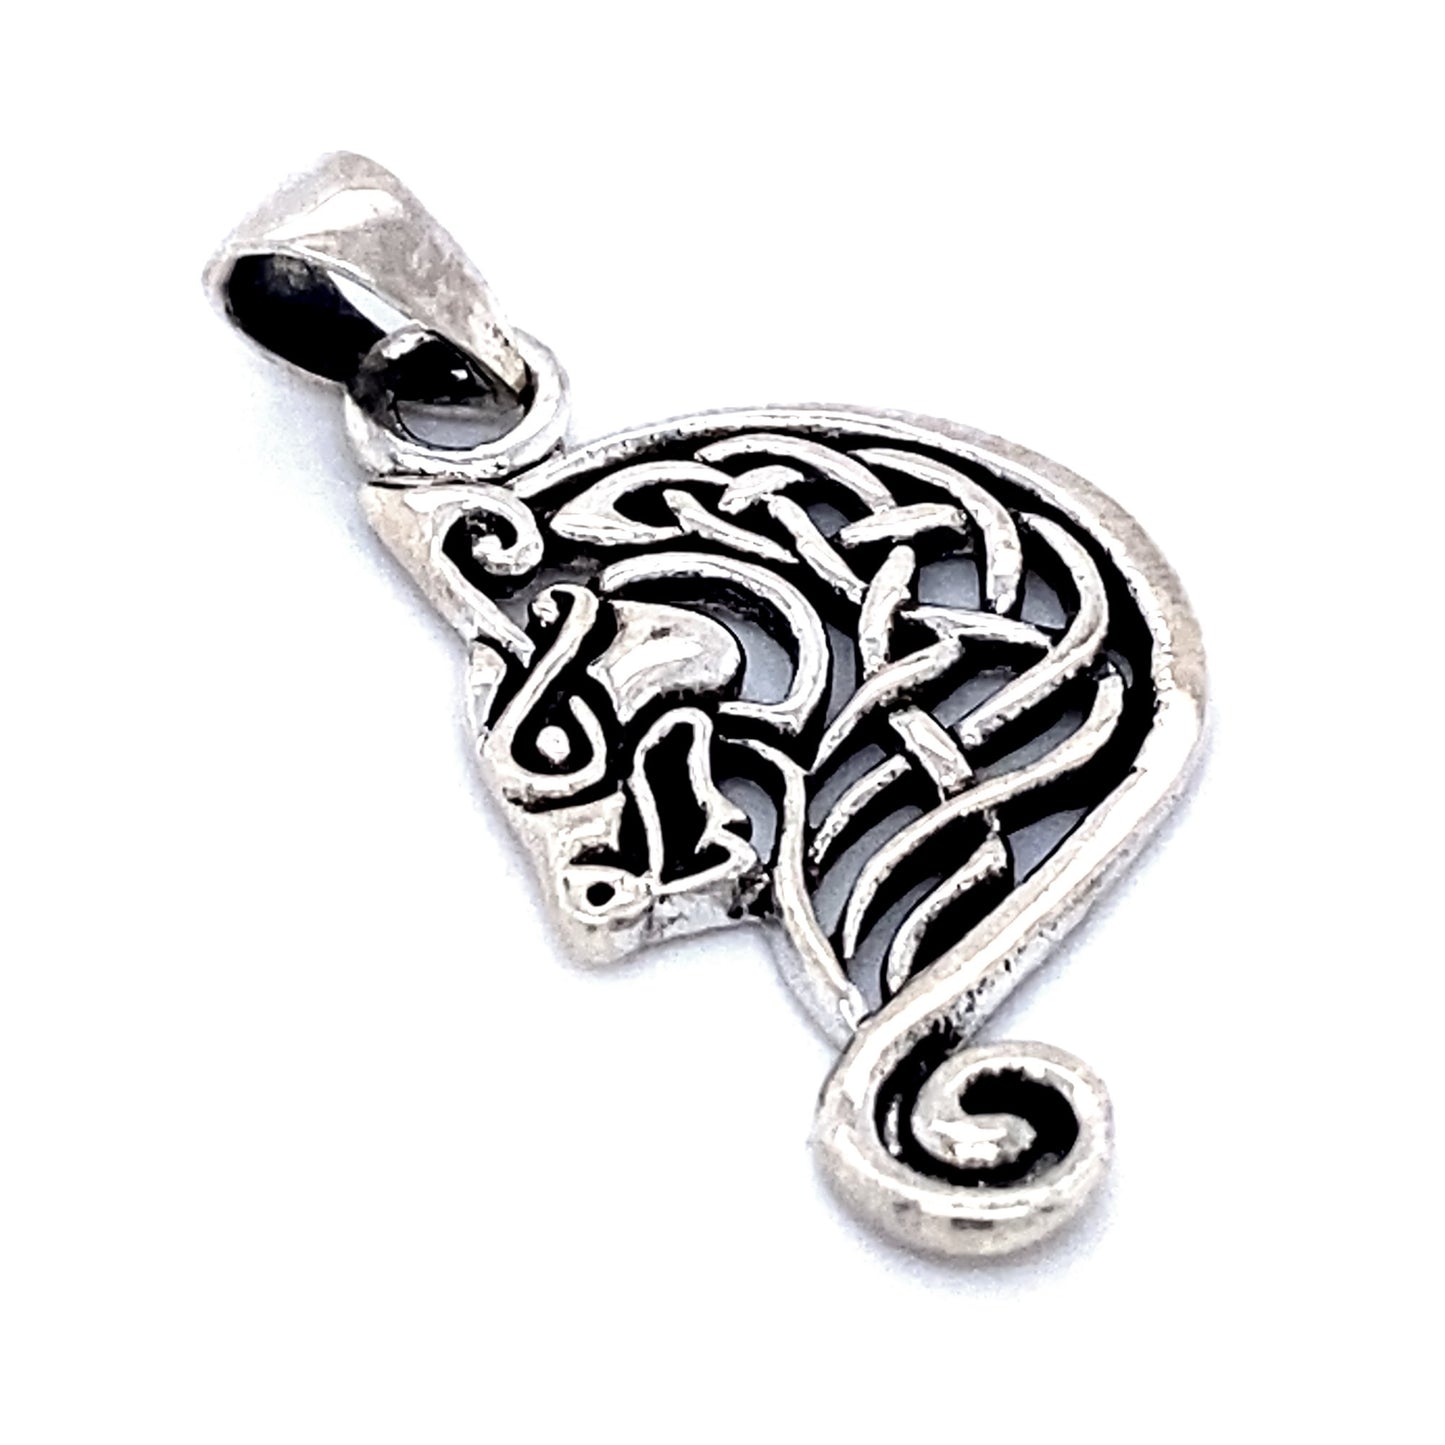 A sterling silver pendant featuring an intricate, stylized design of a dragon's head with hints of Celtic weave.